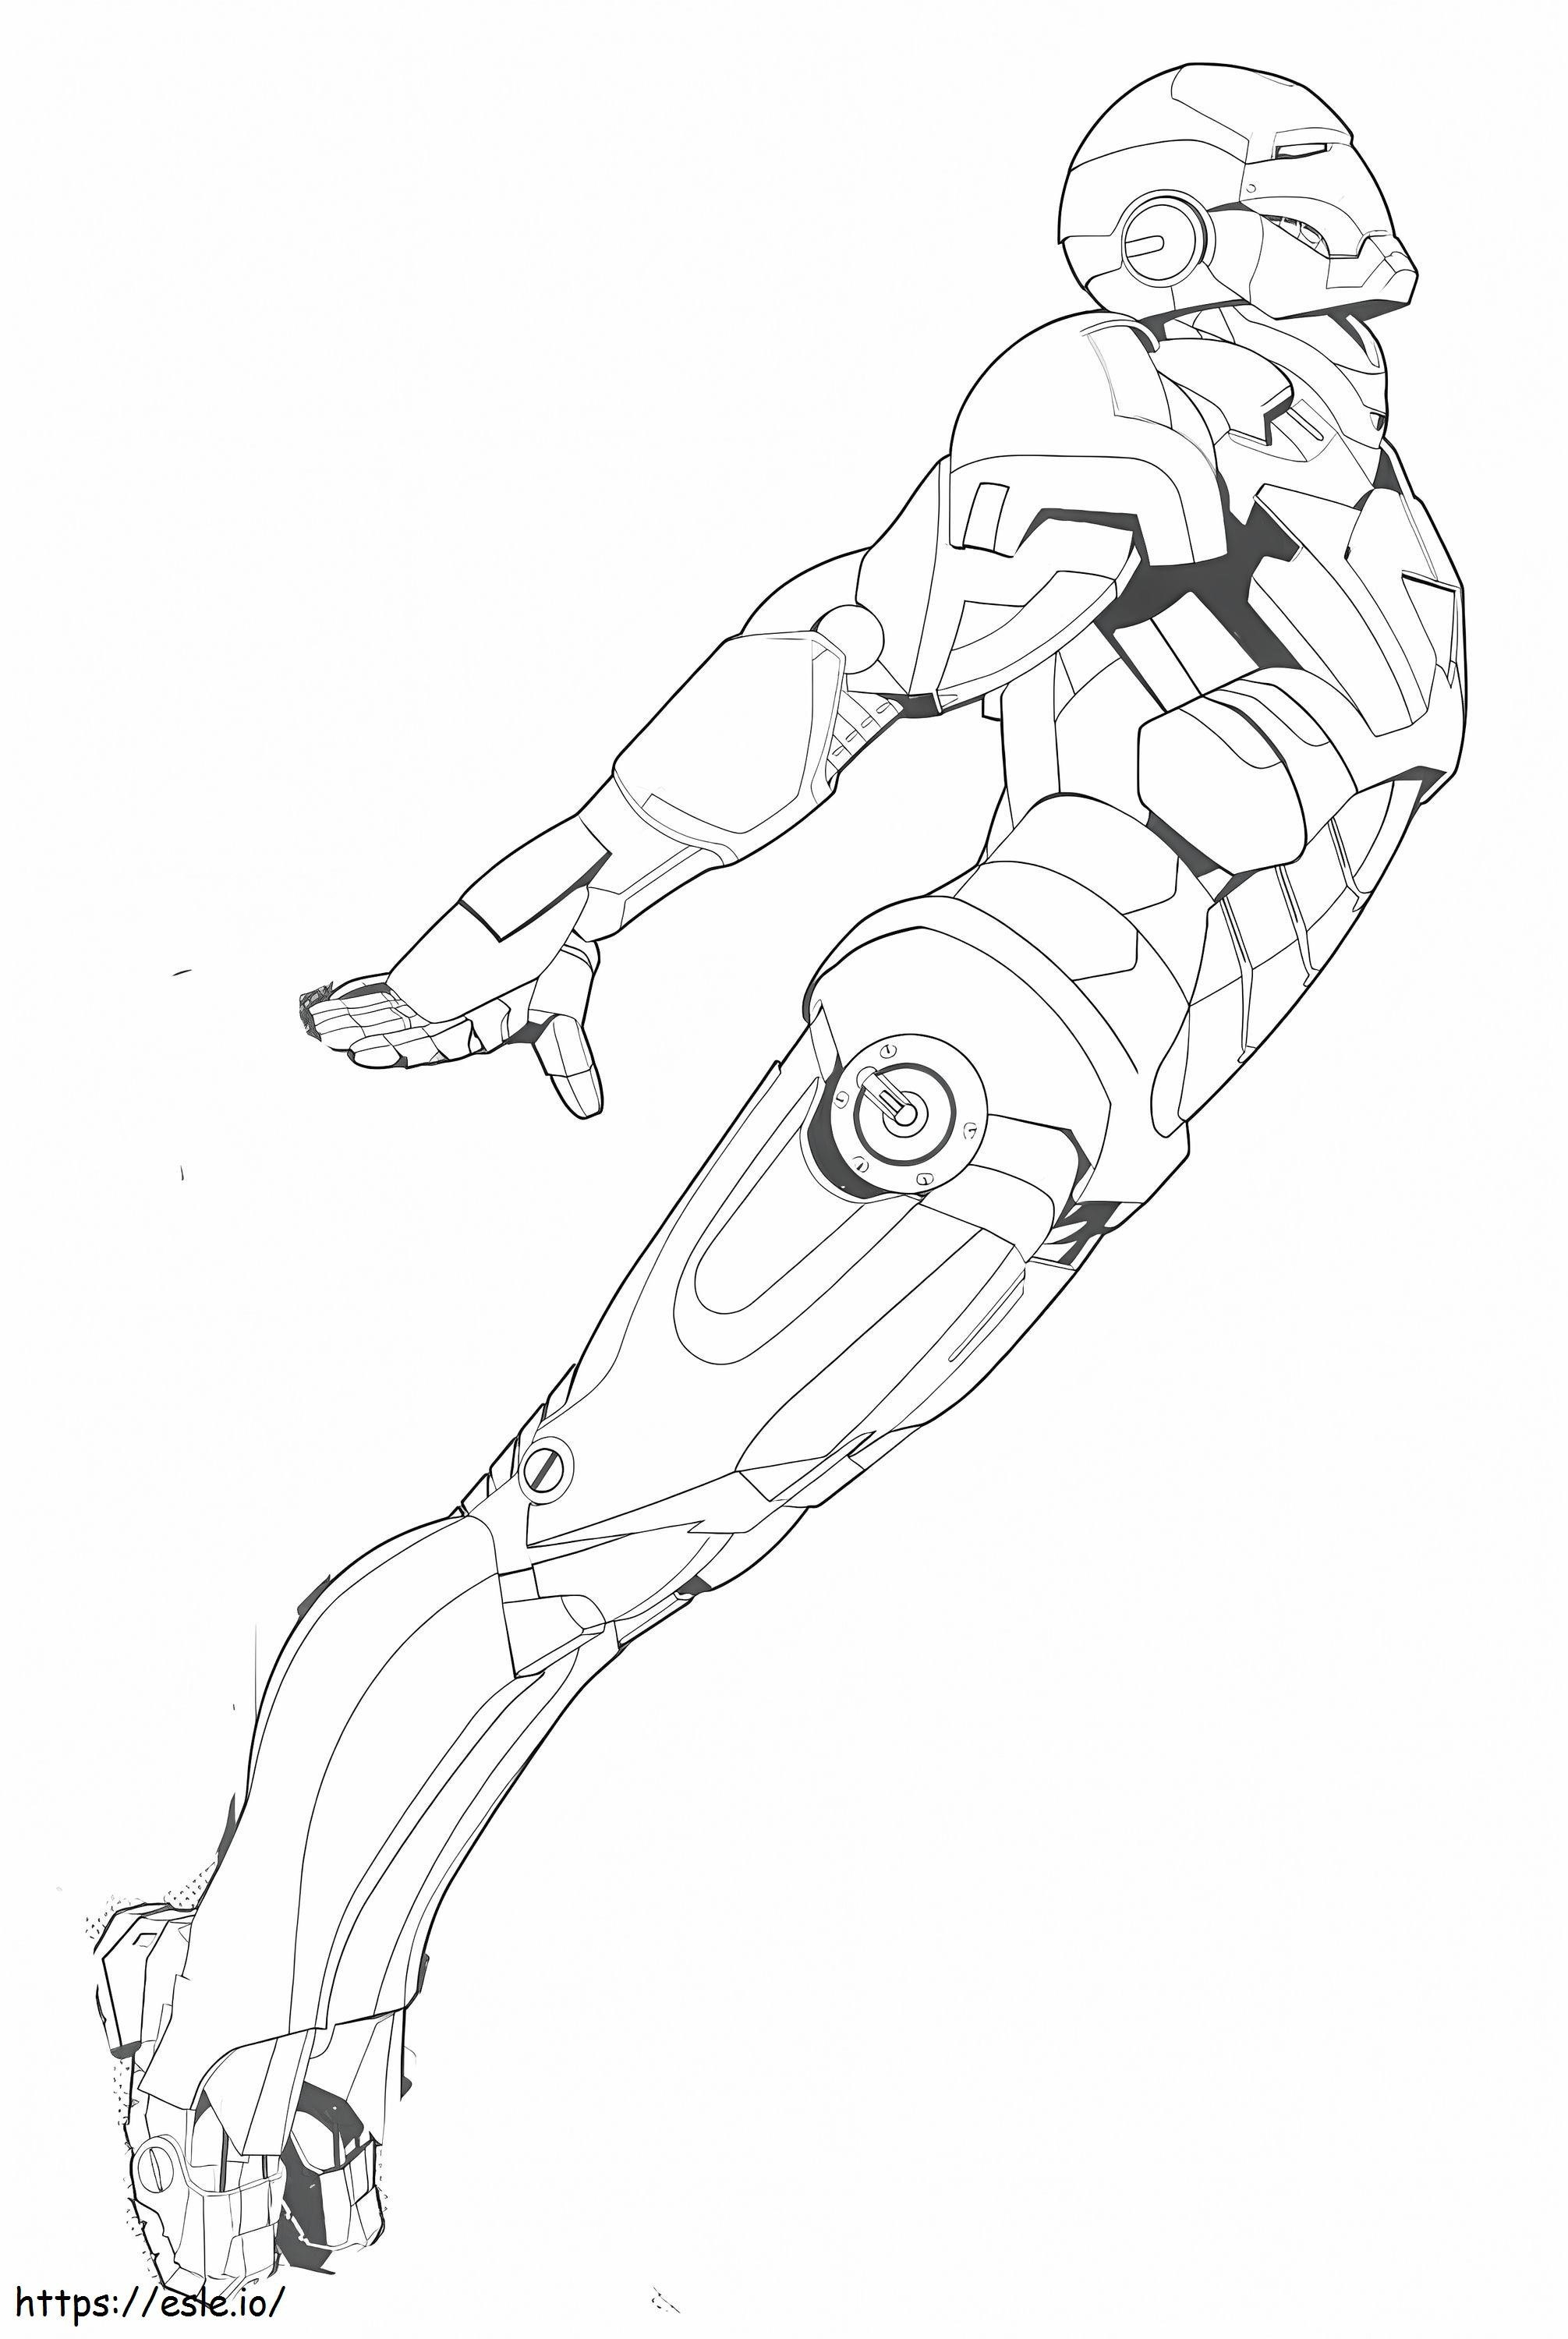 Iron Man Flying Up coloring page